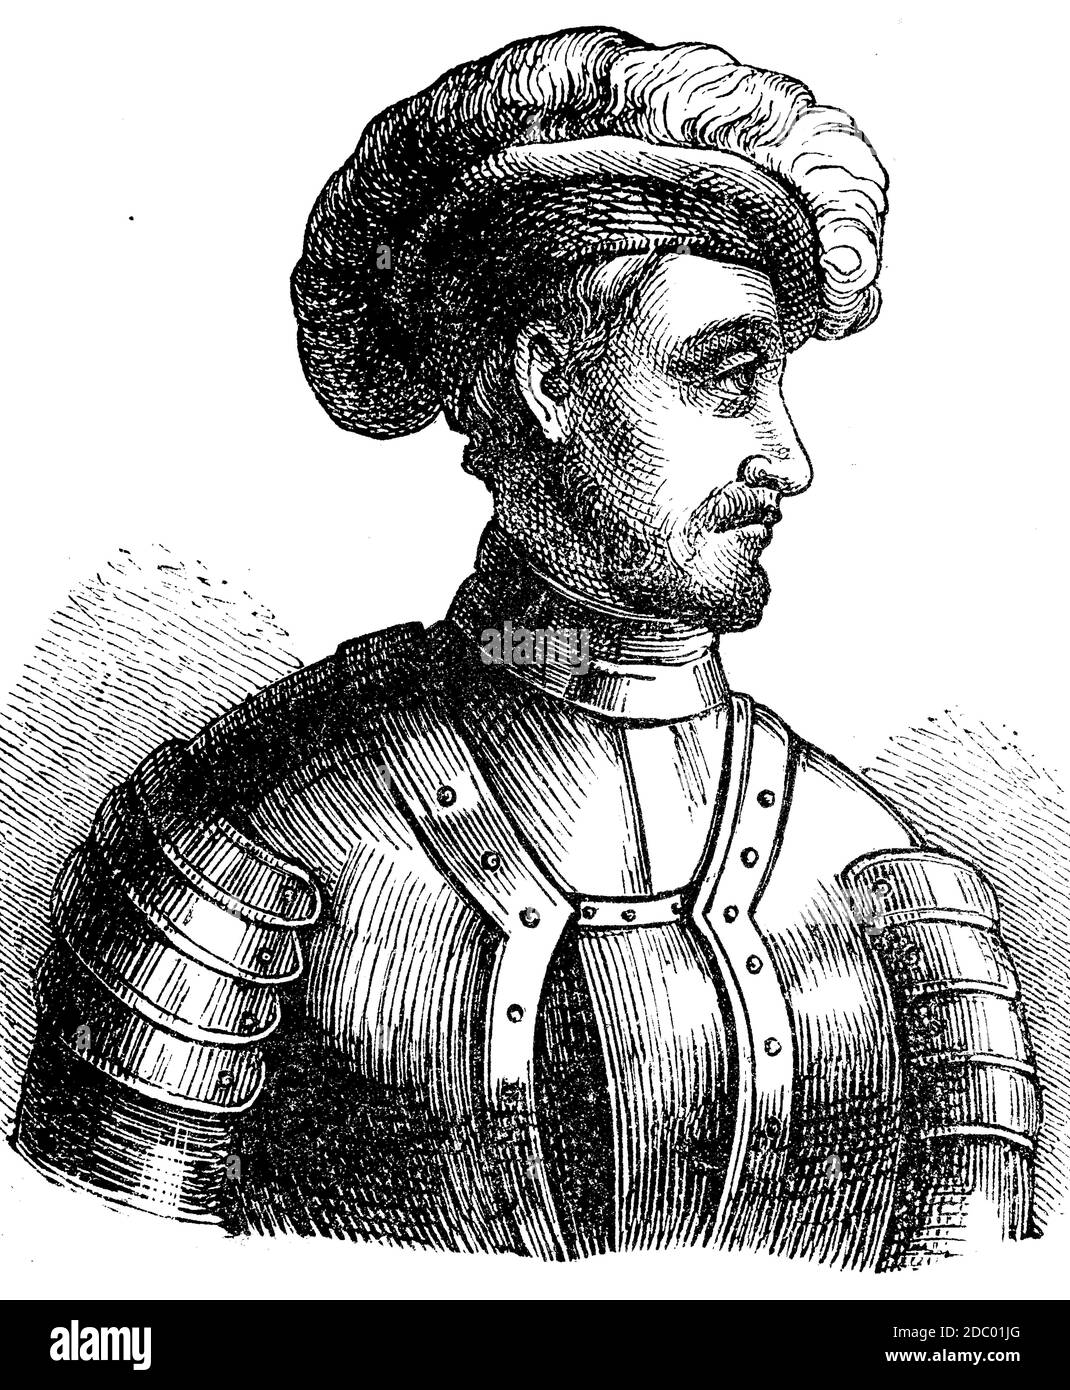 Charles III., 17 February 1490 – 6 May 1527, French military leader, the count of Montpensier, Clermont and Auvergne, and dauphin of Auvergne from 1501 to 1523, then duke of Bourbon and Auvergne, count of Clermont-en-Beauvaisis, Forez and La Marche, and lord of Beaujeu from 1505 to 1521  /  Charles III., Herzog von Bourbon-Montpensier, 17. Februar 1490 - 6. Mai 1527, war ein französischer Politiker und erfolgreicher Heerführer, Historisch, historical, digital improved reproduction of an original from the 19th century / digitale Reproduktion einer Originalvorlage aus dem 19. Jahrhundert Stock Photo